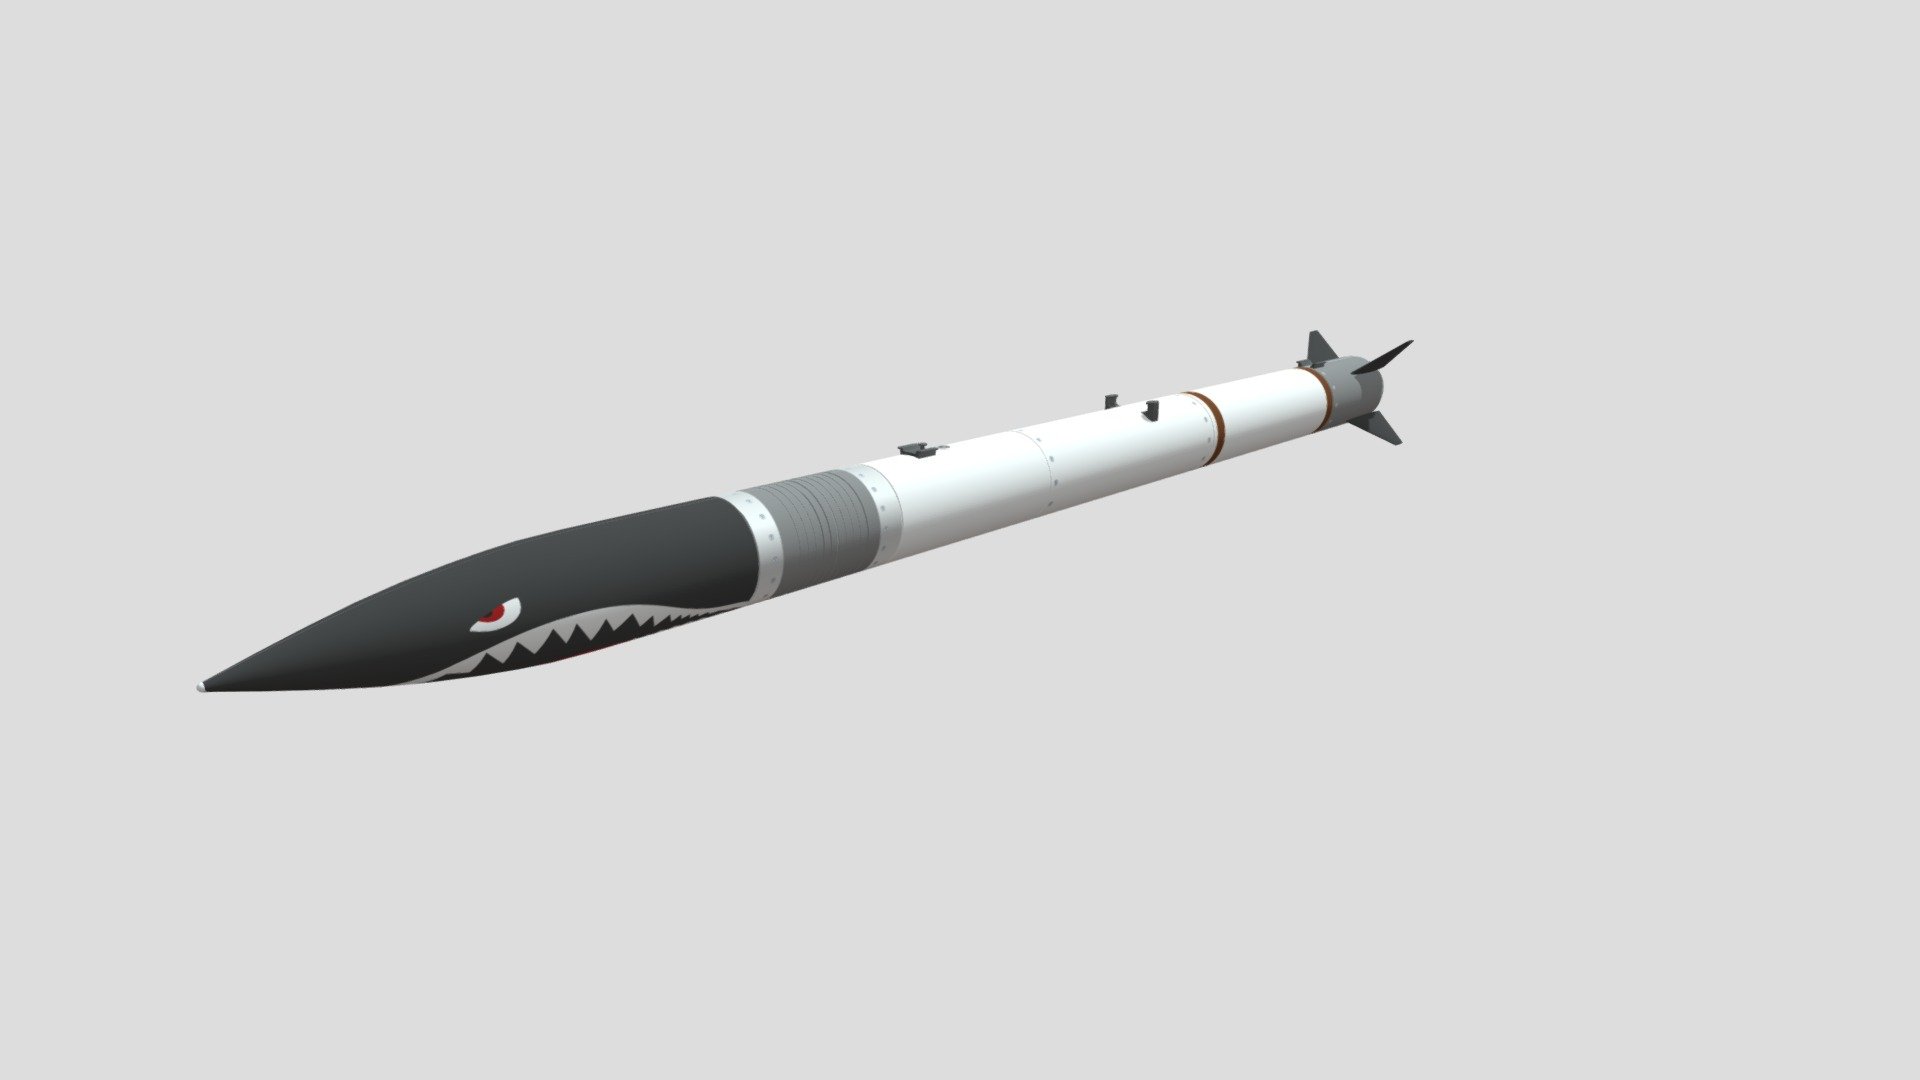 MUTANT Missile
Project MUTANT is Missile Utility Transformation via Articulated Nose Technology which is being developed by The Air Force Research Laboratory.

https://www.artstation.com/artwork/WBB1GN - MUTANT - 3D model by Akela Freedom (@AkelaFreedom) 3d model